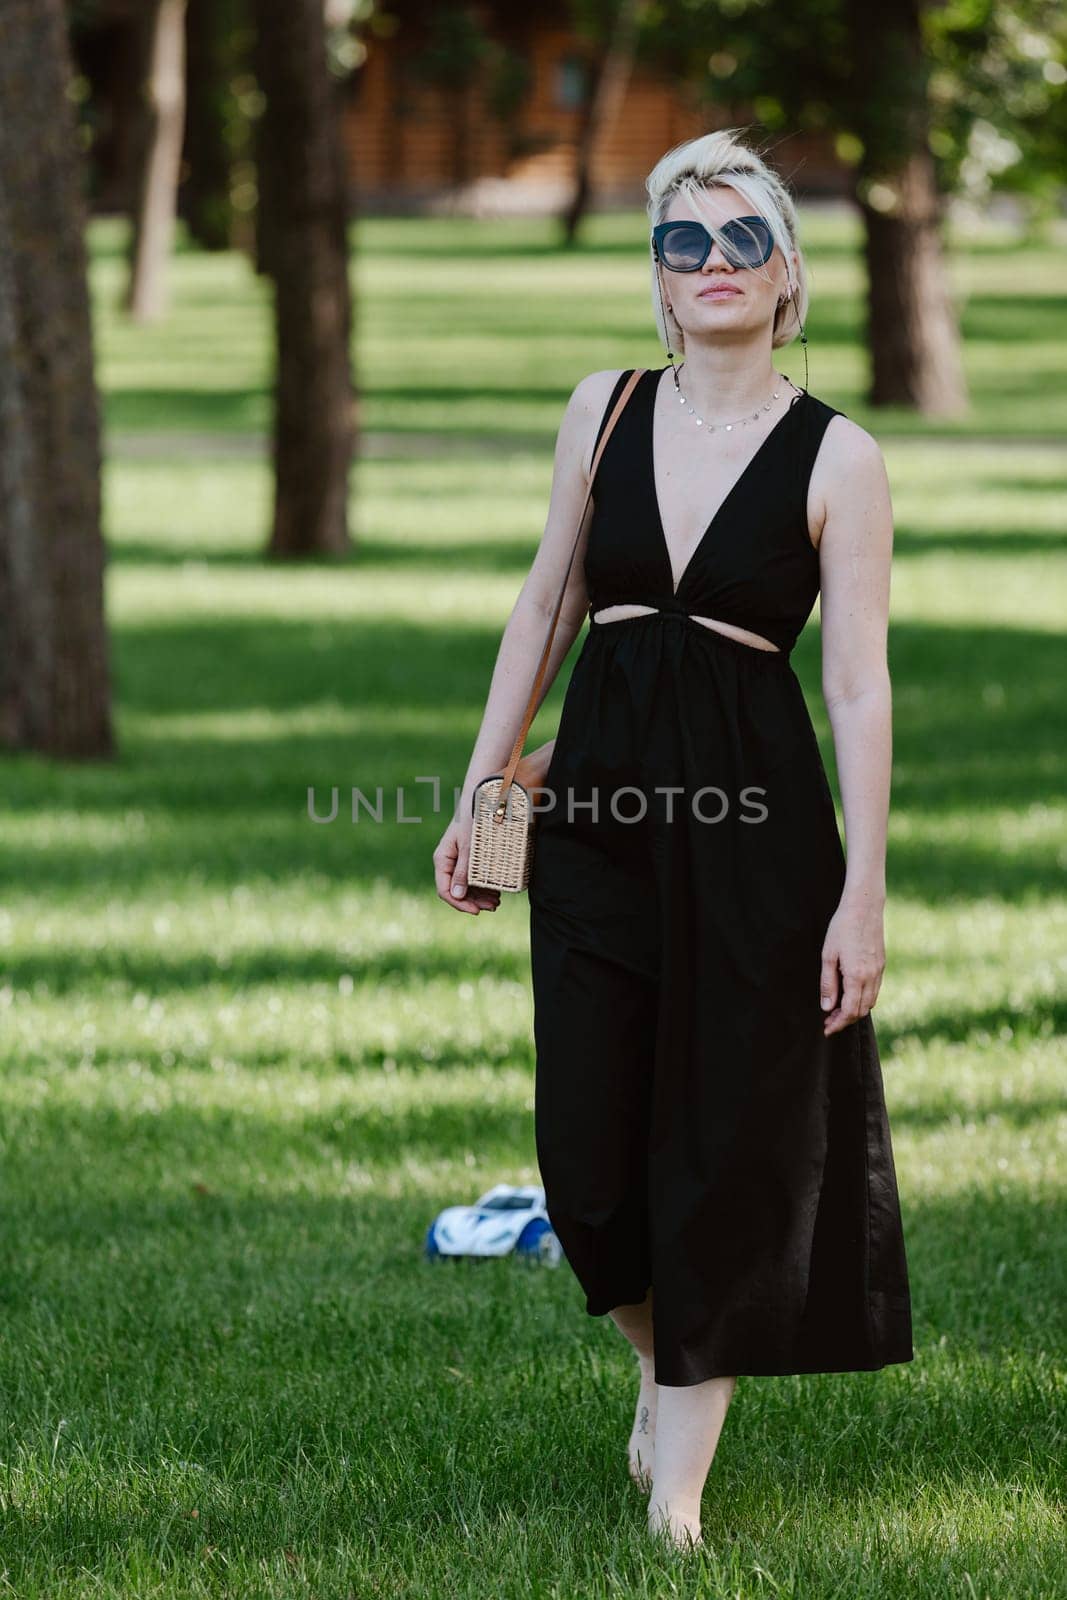 Young blond woman with short hair stands at full height in a park wearing sunglasses and black dress